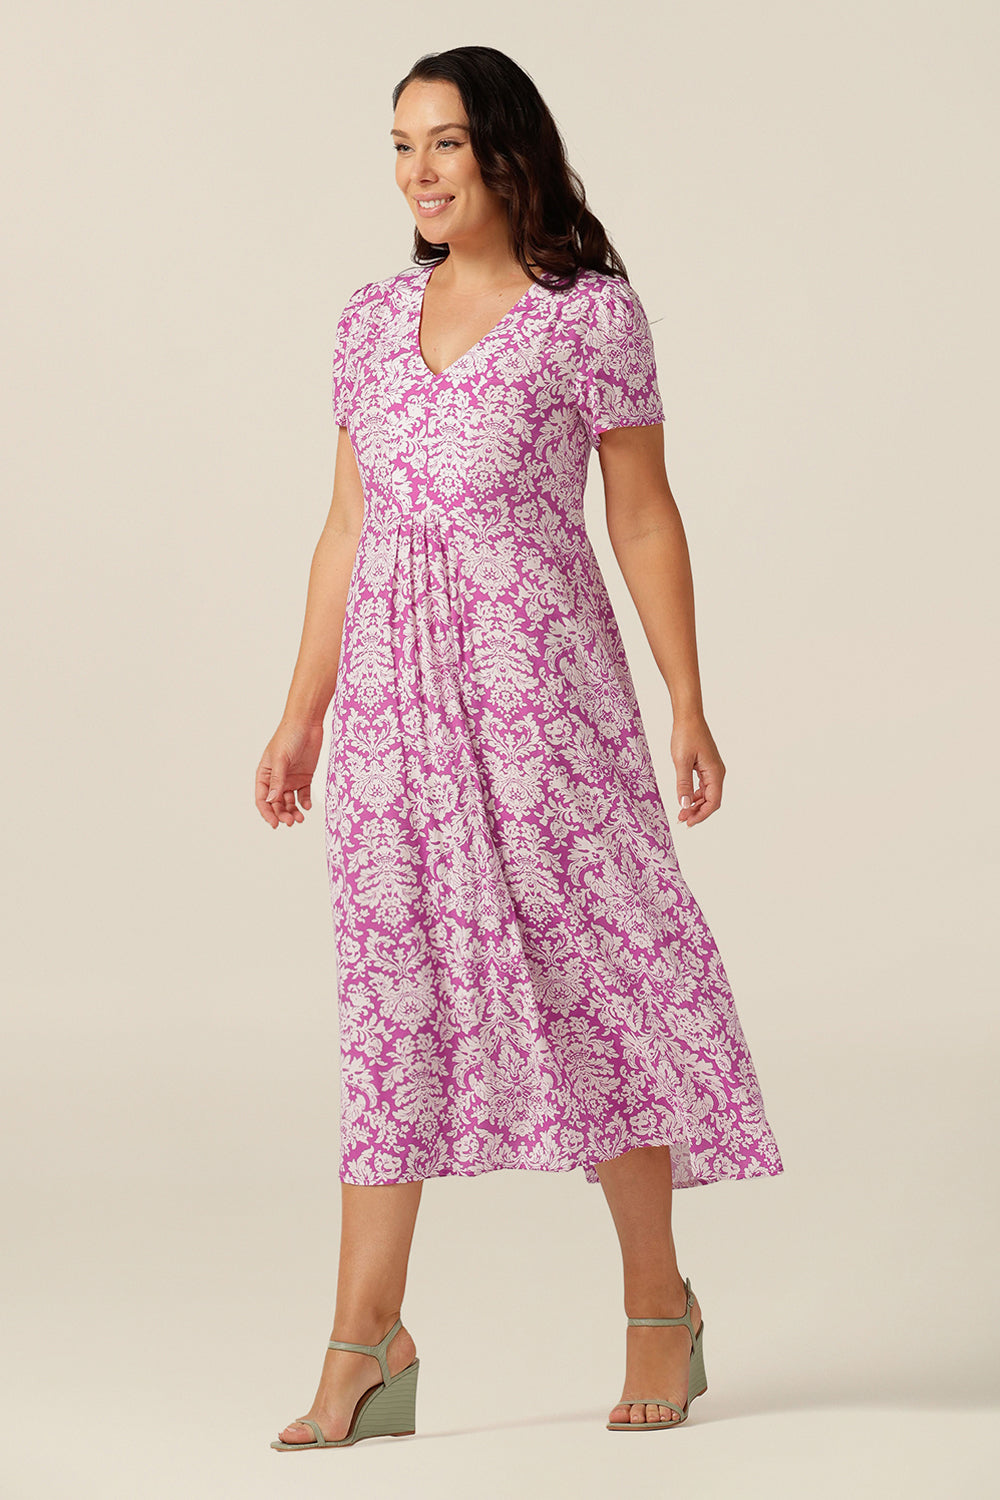 Luxe flowing summer maxi dress, in breathable, lightweight Cupro EcoVero fabric, the Marlene Dress is made in Australia for petite to plus size women.